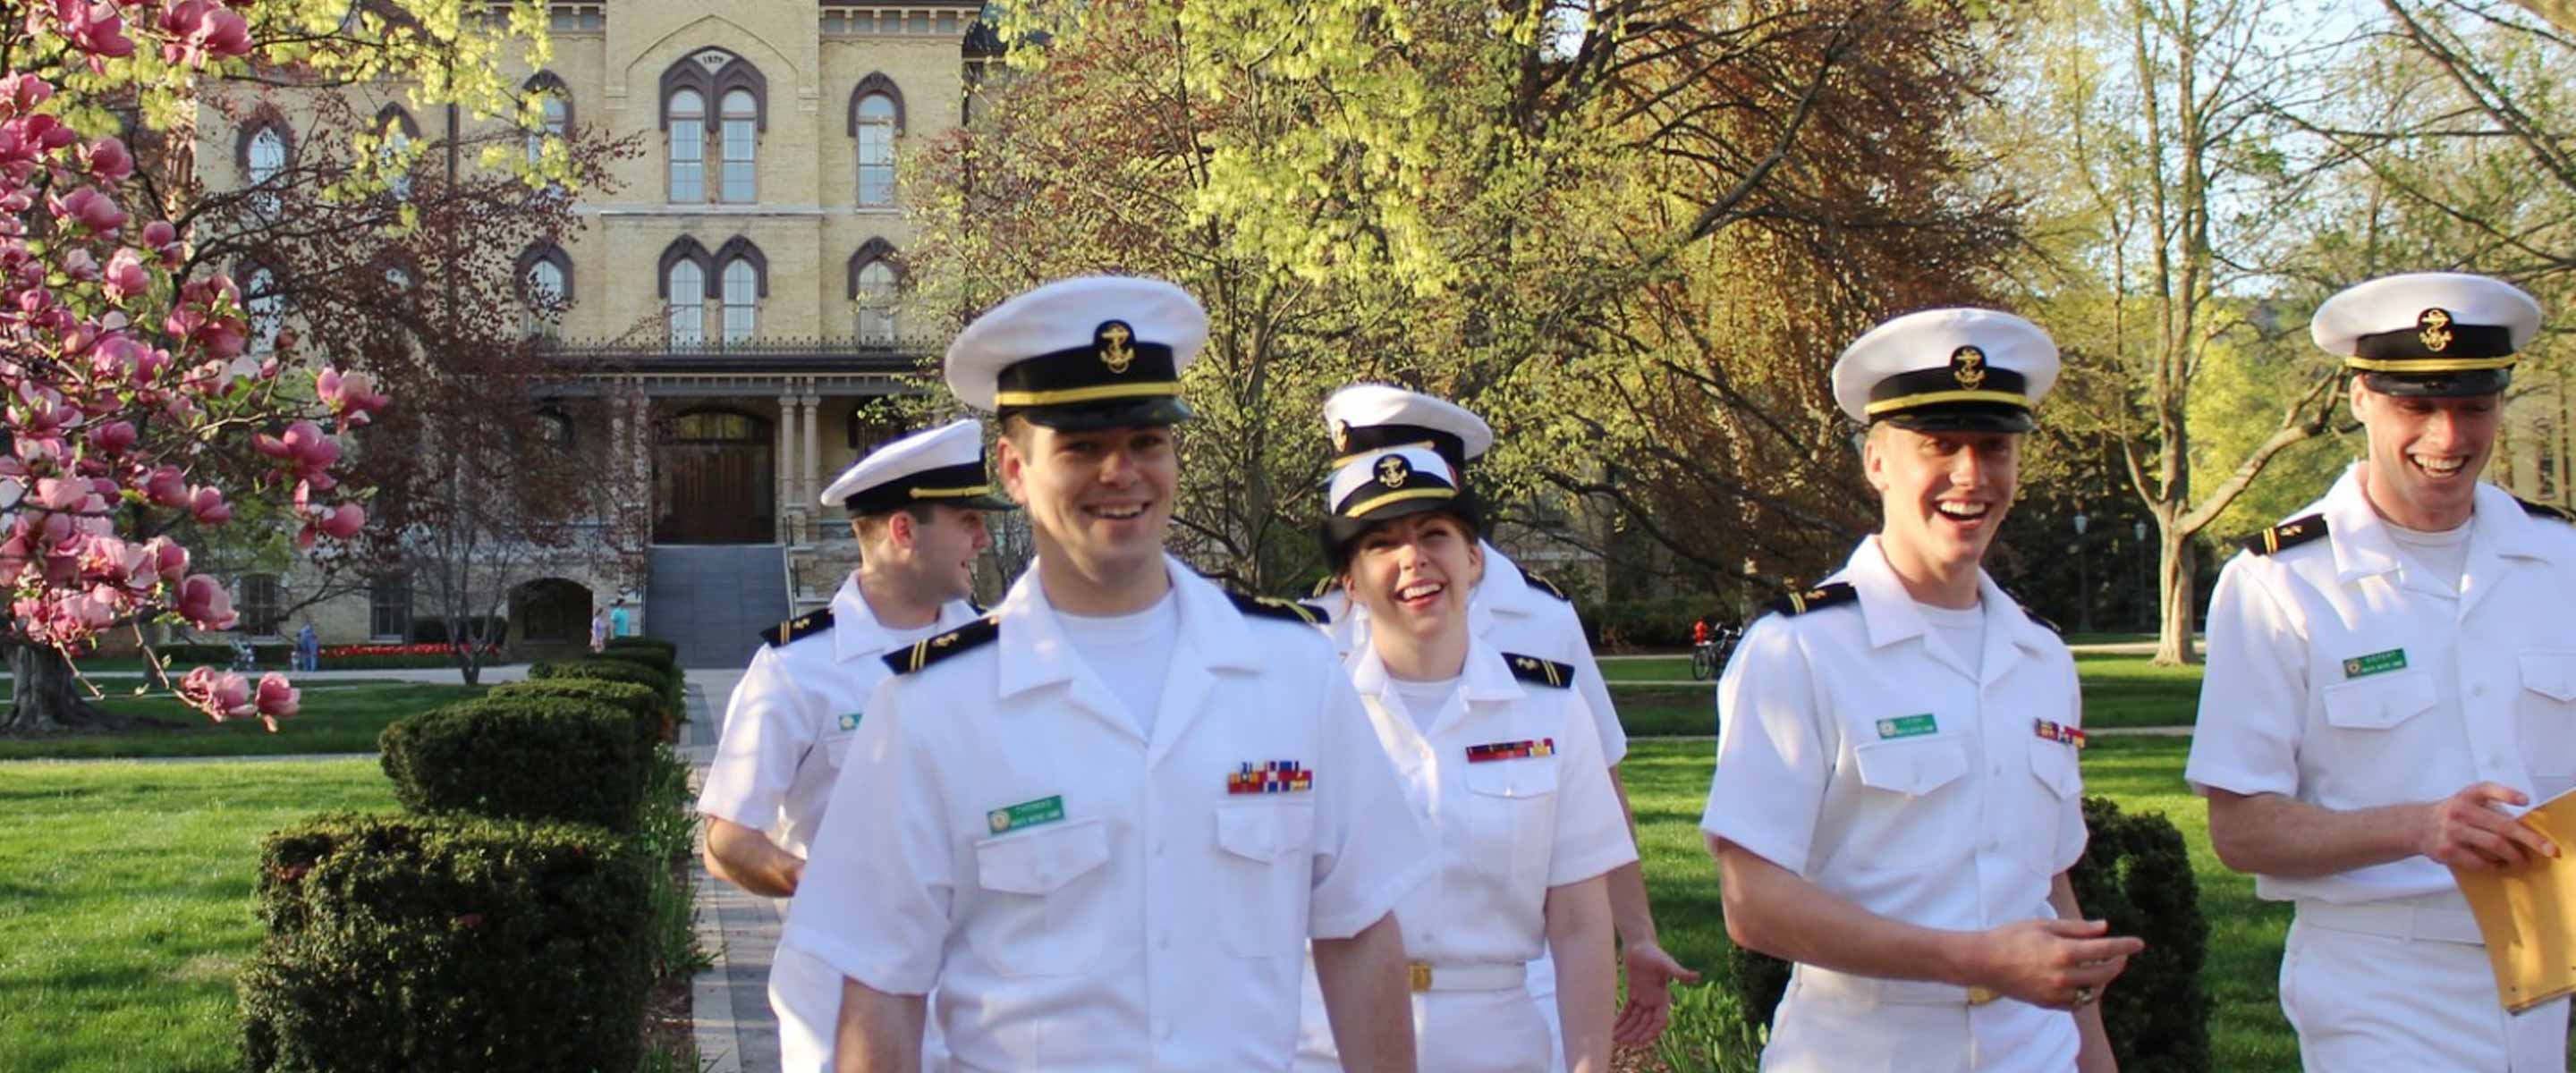 Navy Midshipman walk together at the Naval Academy